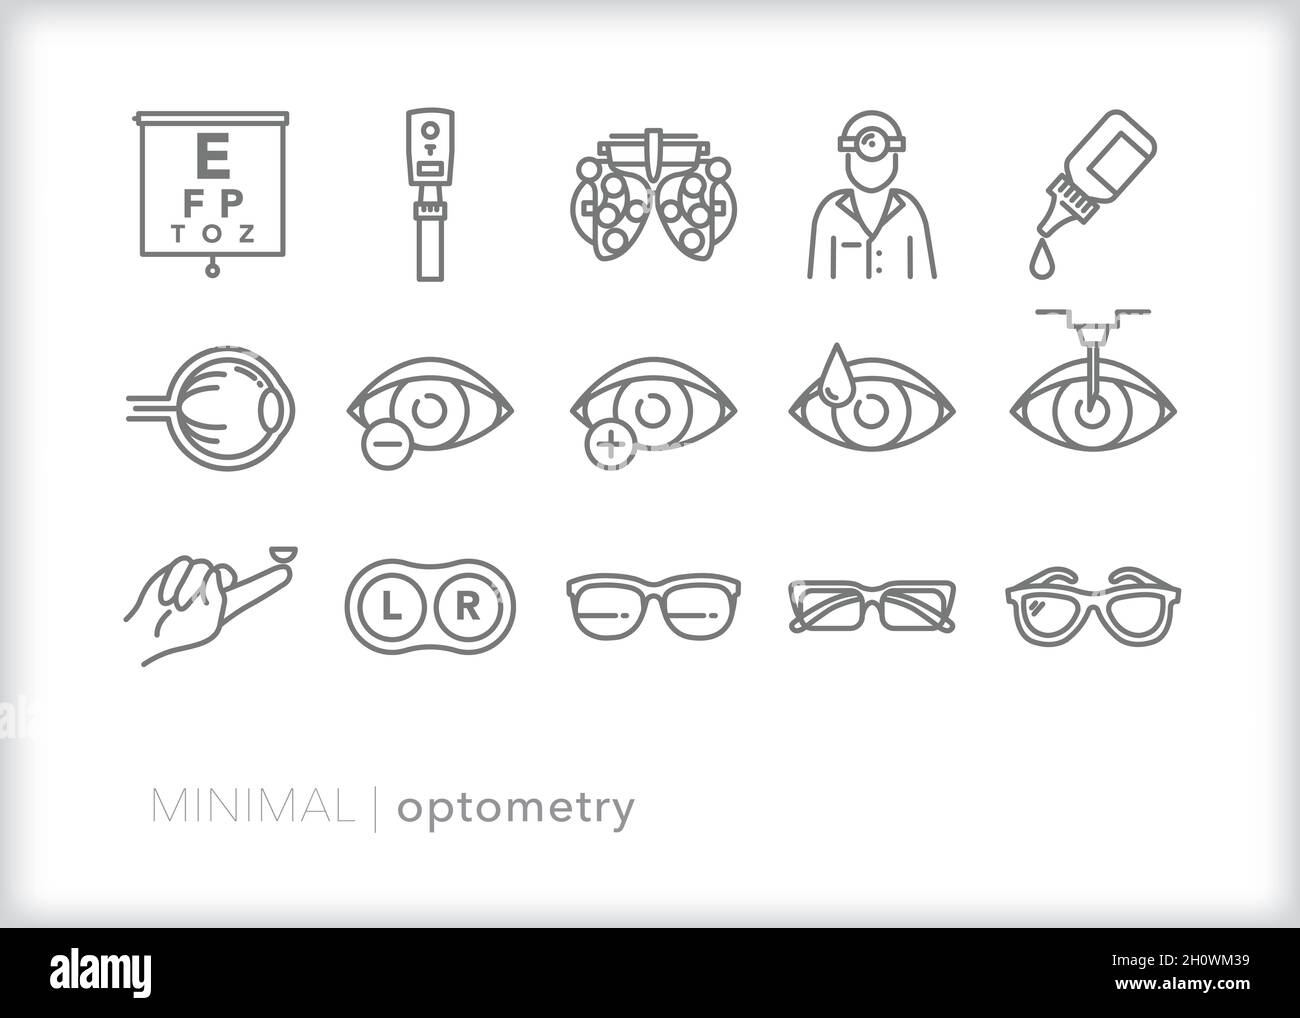 Set of optometry icons for an optometrist doing an annual eye exam looking at vision health Stock Vector